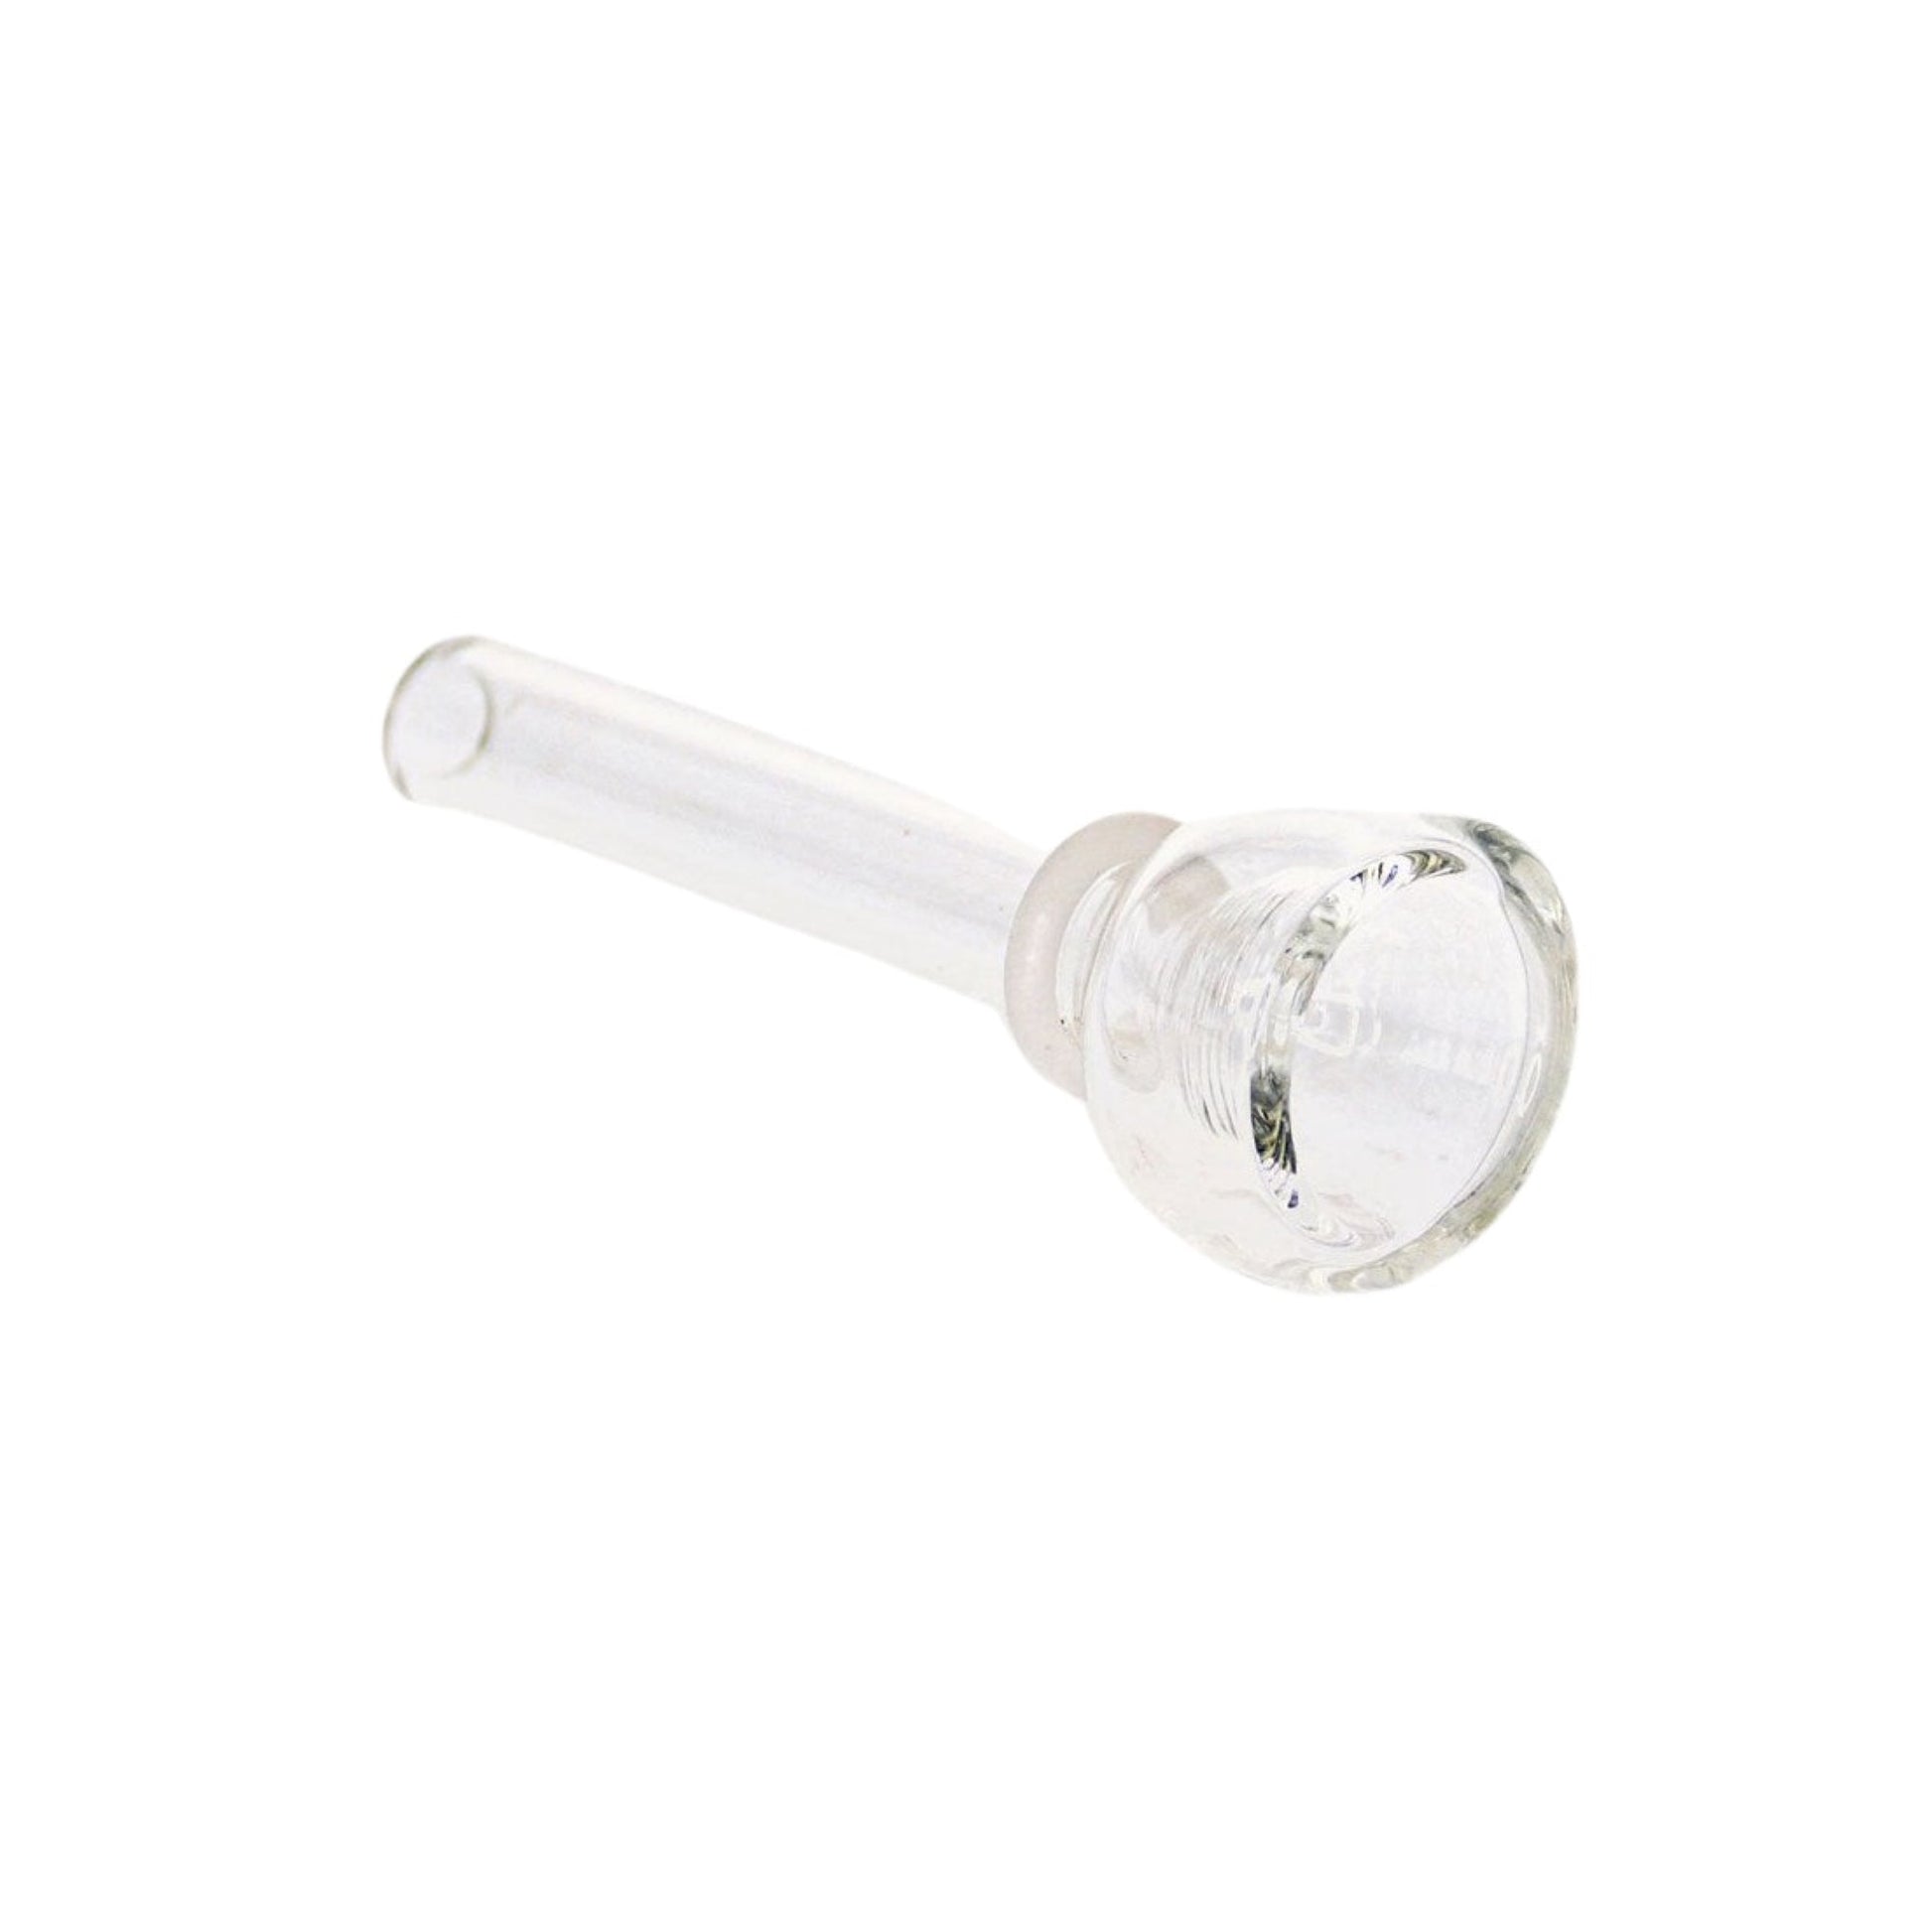 My Bud Vase Small Clear Bubble Bowl Slide by My Bud Vase | Mission Dispensary